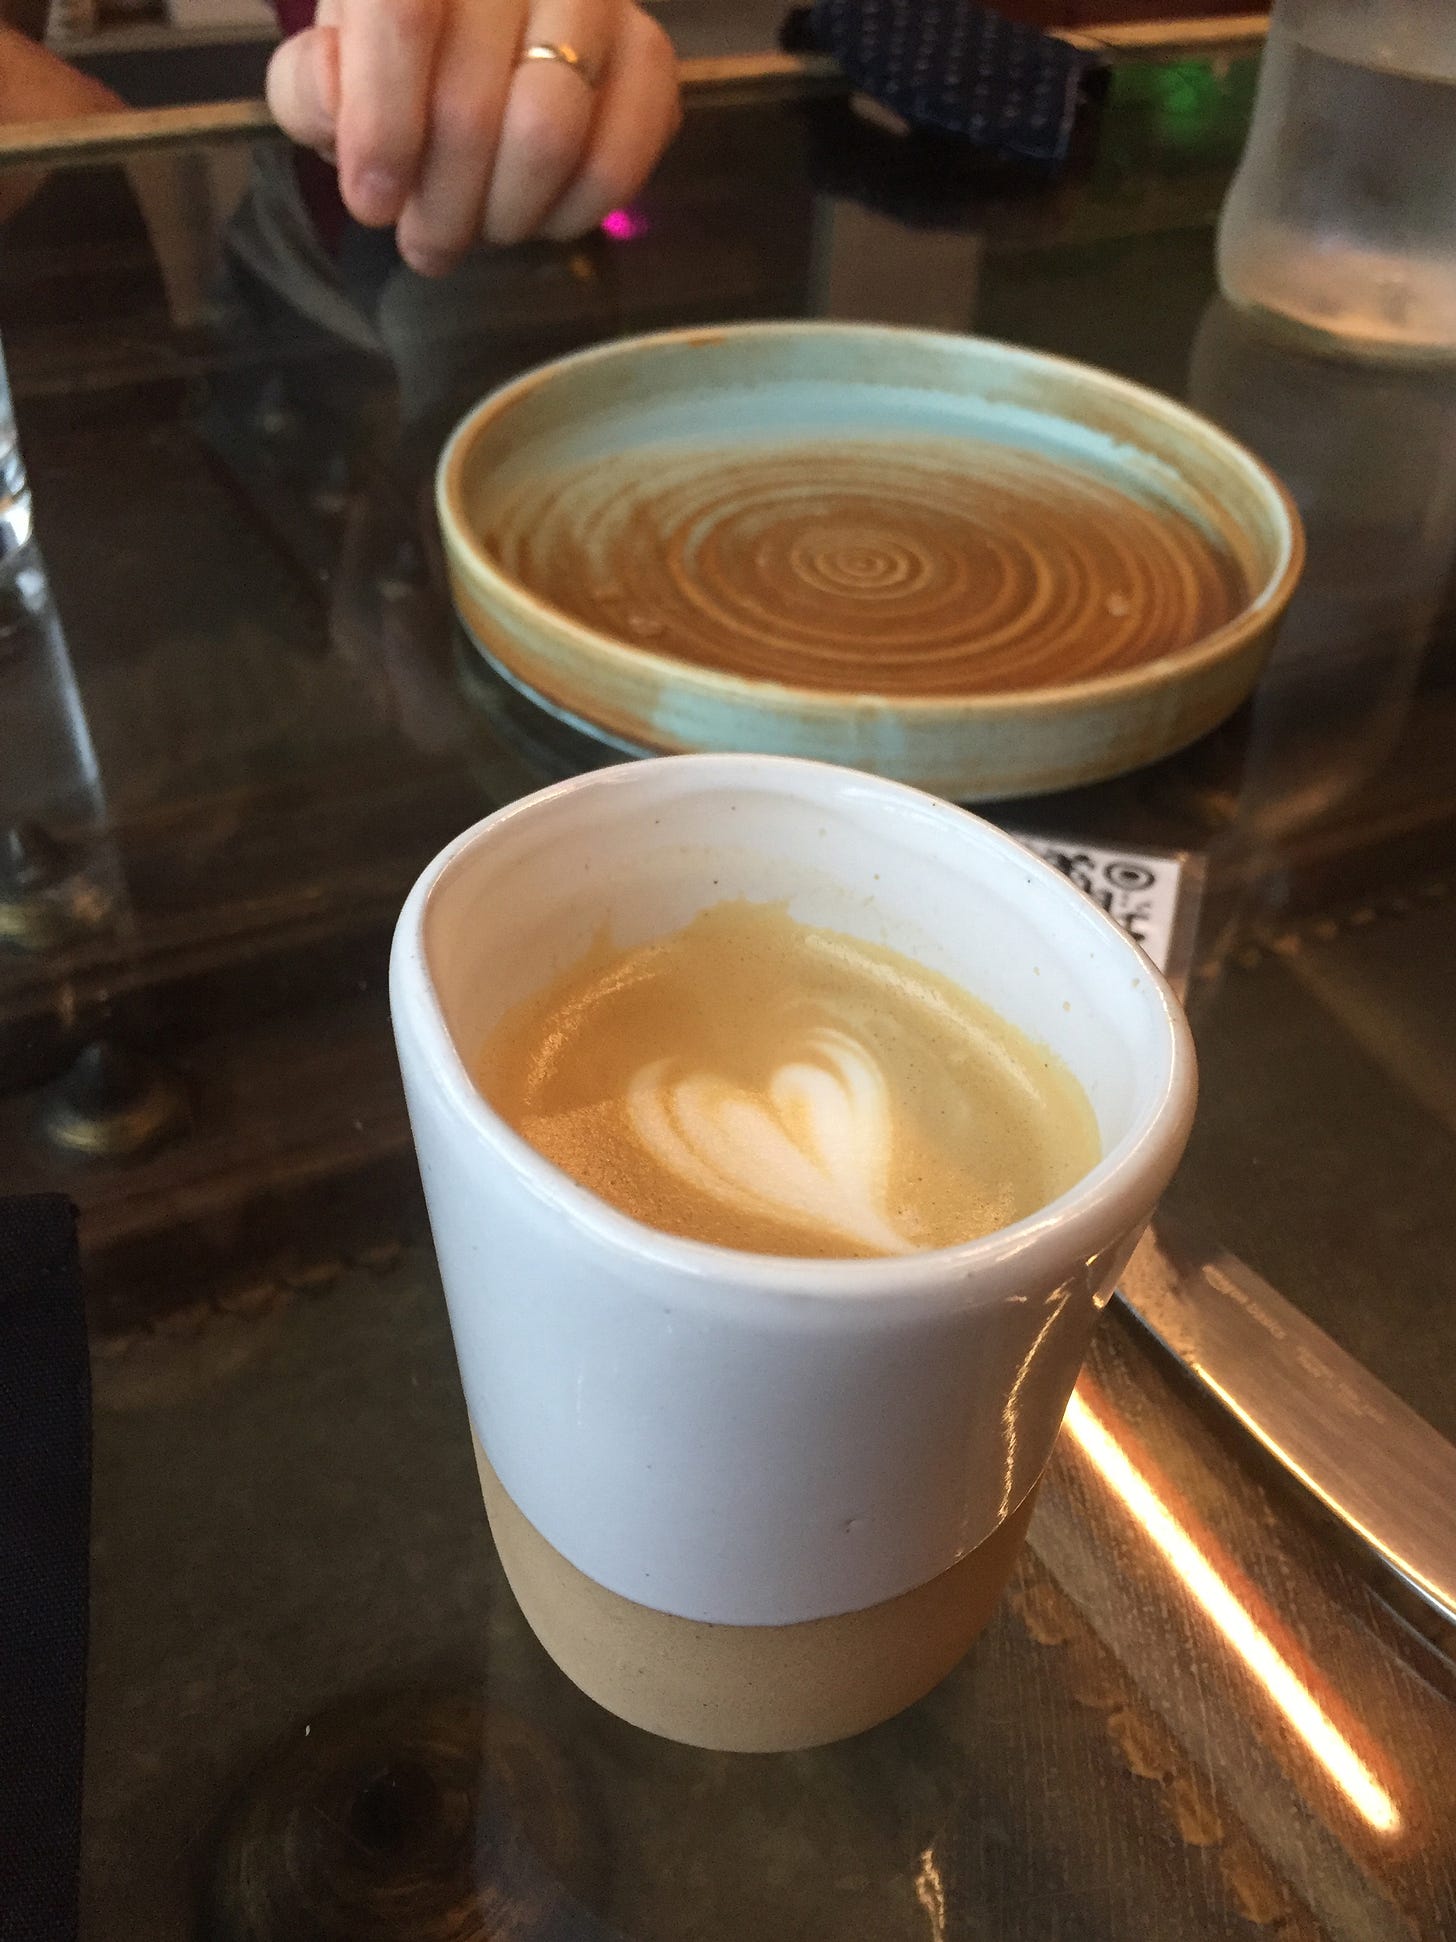 In the foreground, a white and tan handle-less mug of a cortado with a leaf drawn on top. Behind it, a teal green and light brown plate with walled sides sits empty. Jeff's hand is in the background behind it.